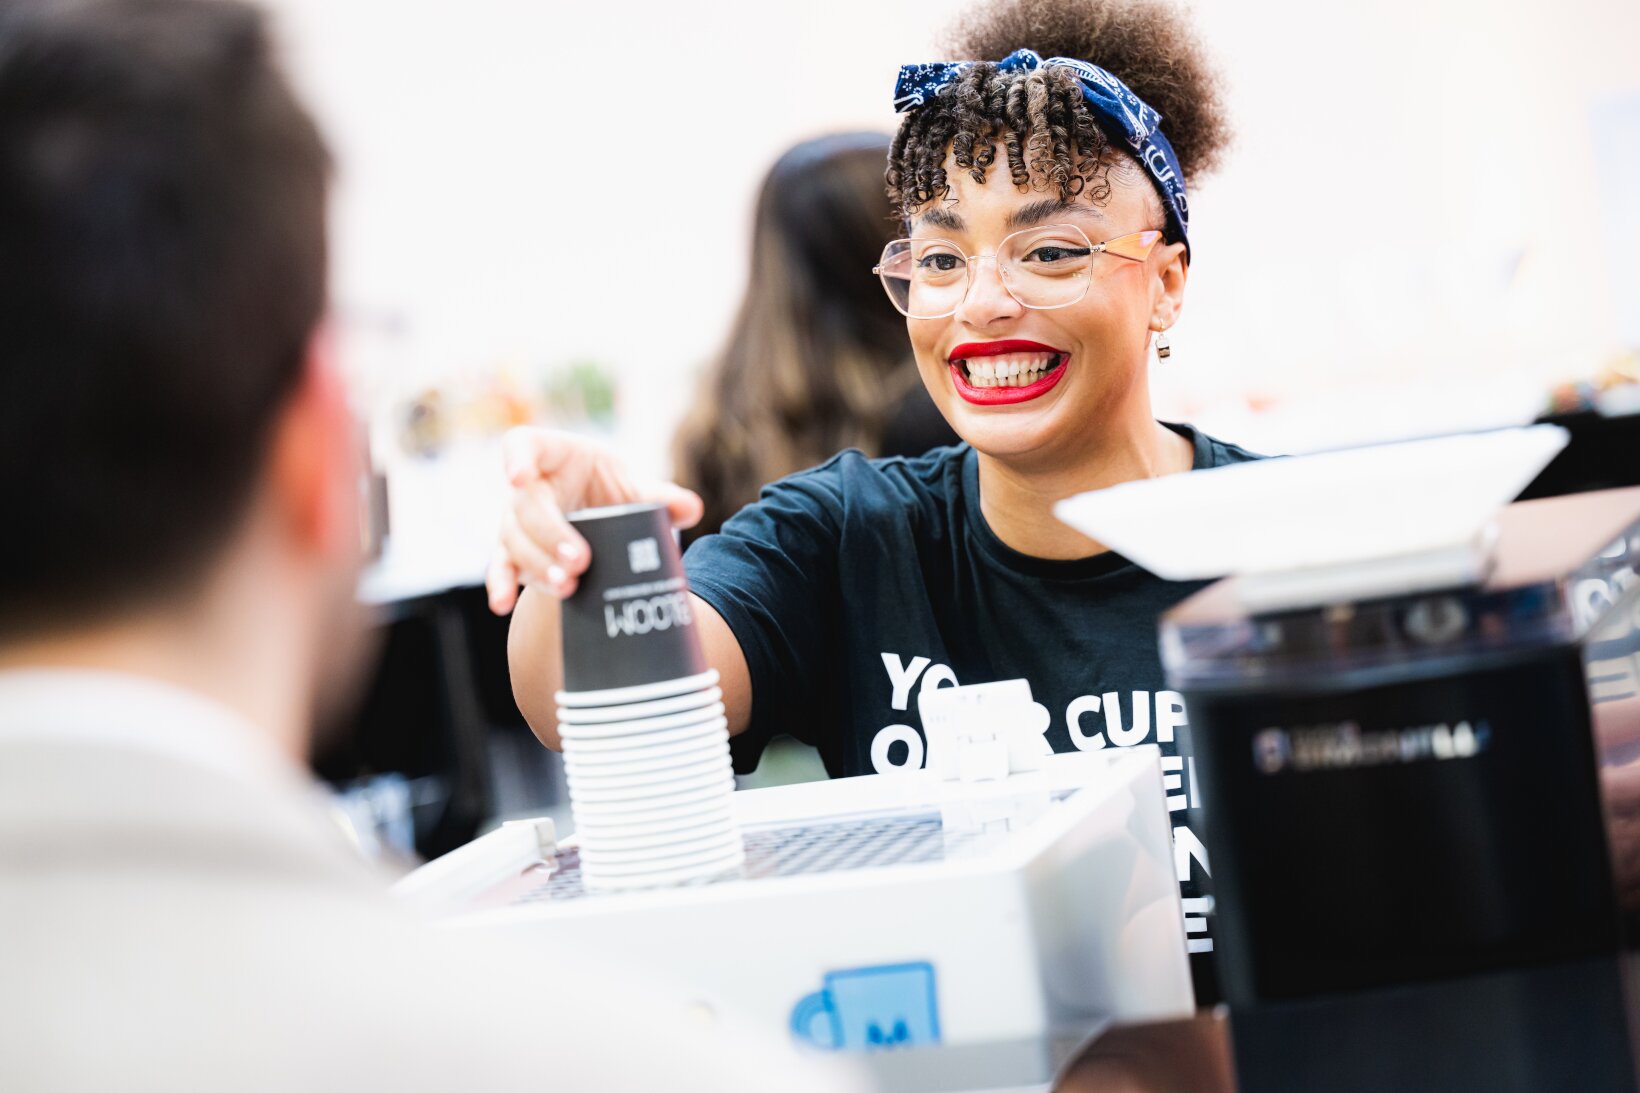 Just Eat for Business backs barista training for vulnerable young people